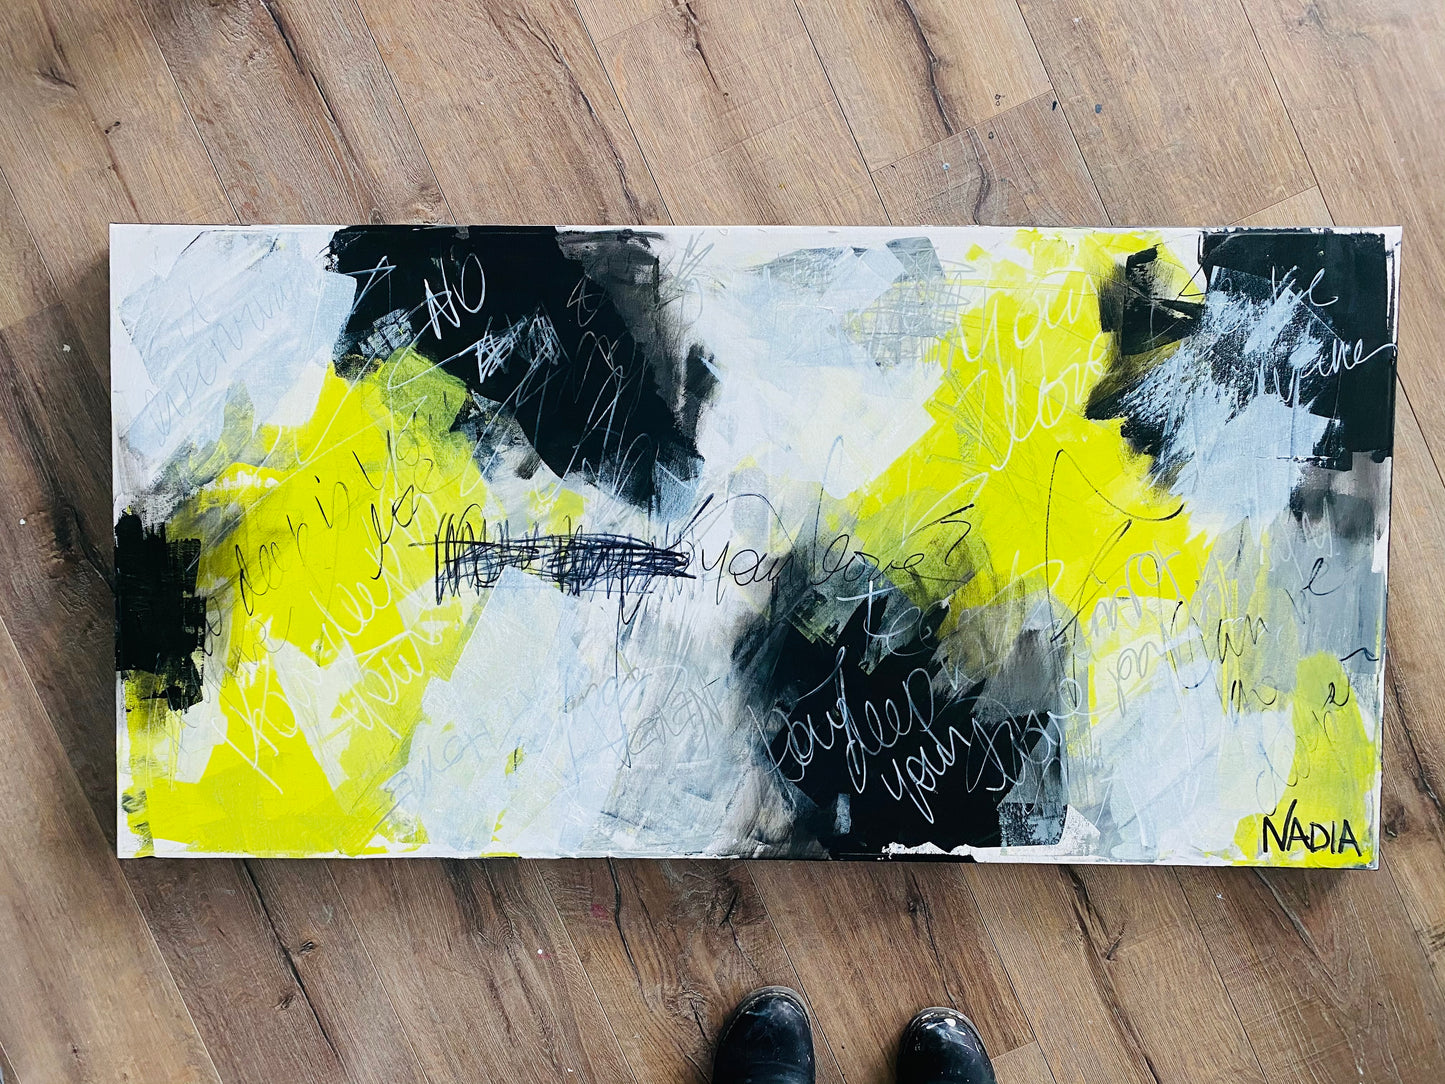 HOW DEEP IS YOUR LOVE (24"x 48" x 2")